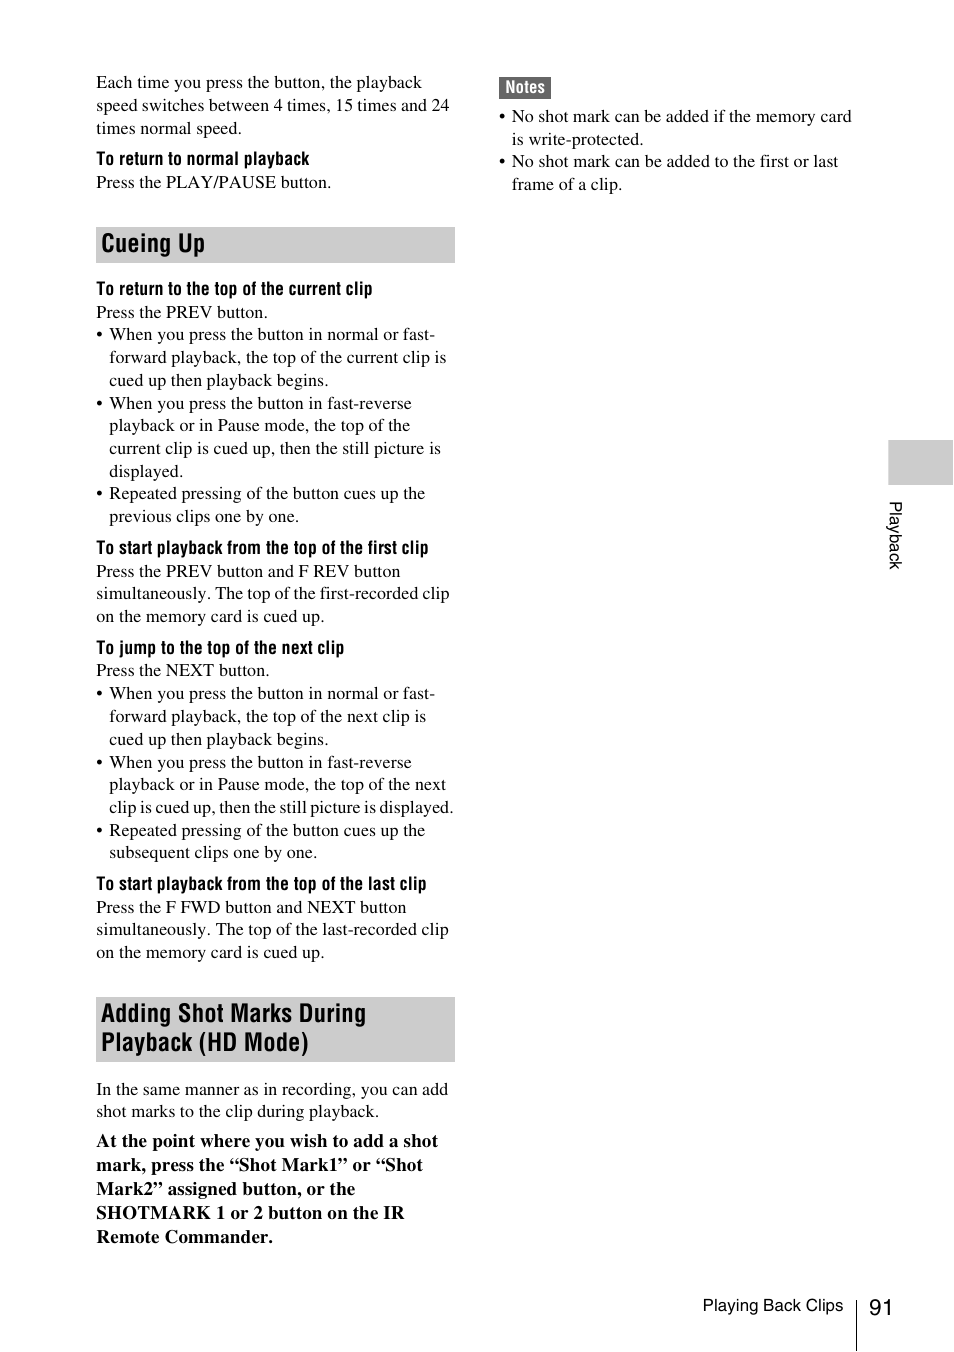 Cueing up, Adding shot marks during playback (hd mode) | Sony PMW-F3K User Manual | Page 91 / 164